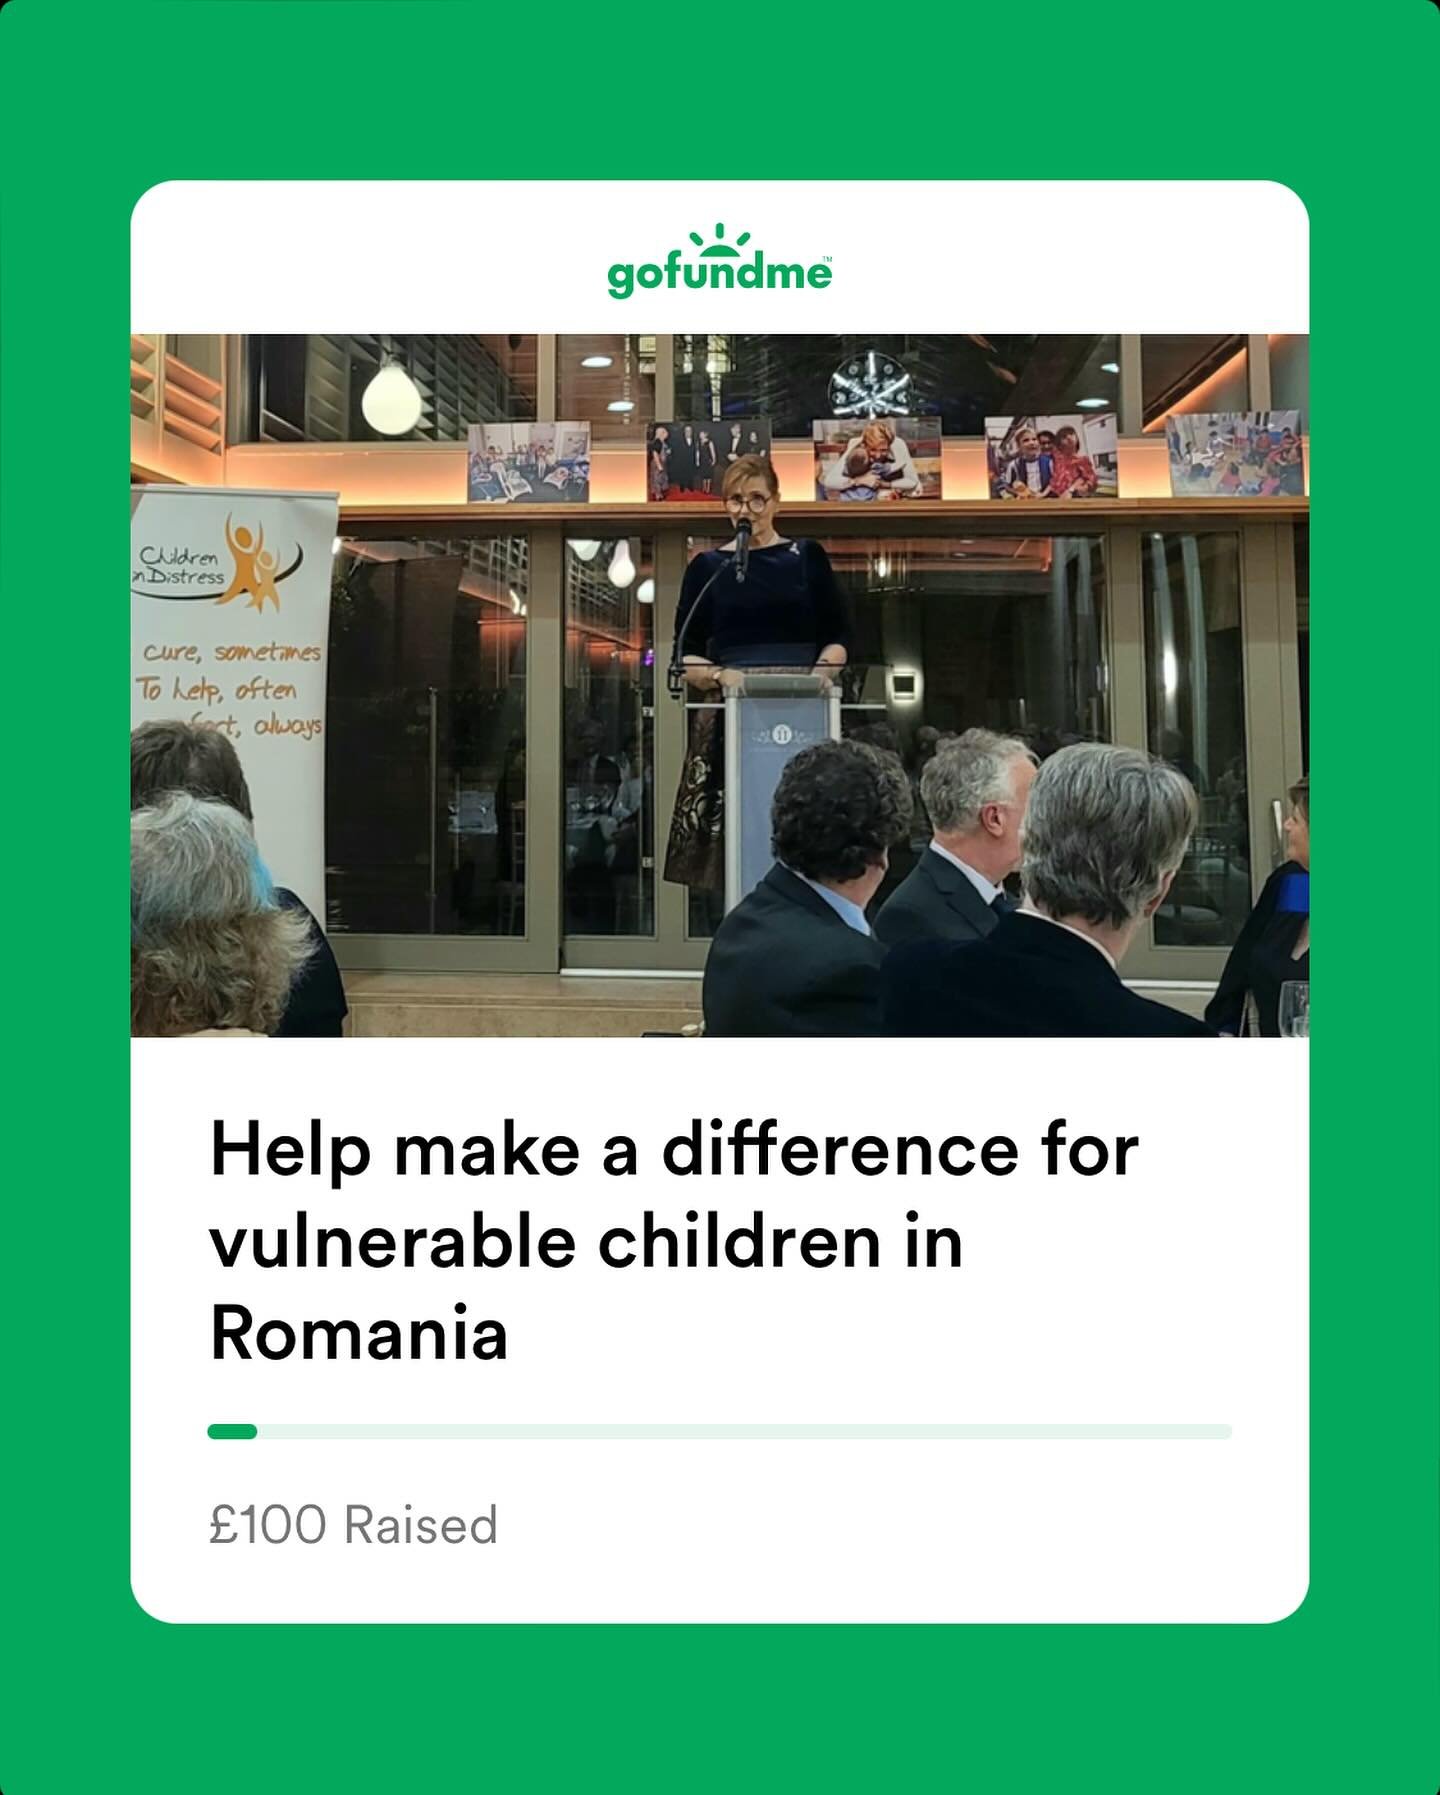 Hi! It&rsquo;s Daniela. Do you want to join me in making a difference? I&rsquo;m raising money in aid of Children In Distress UK @childrenindistress and every donation matters. Swipe left for the QR code. 

I will match/double your donation, so pleas